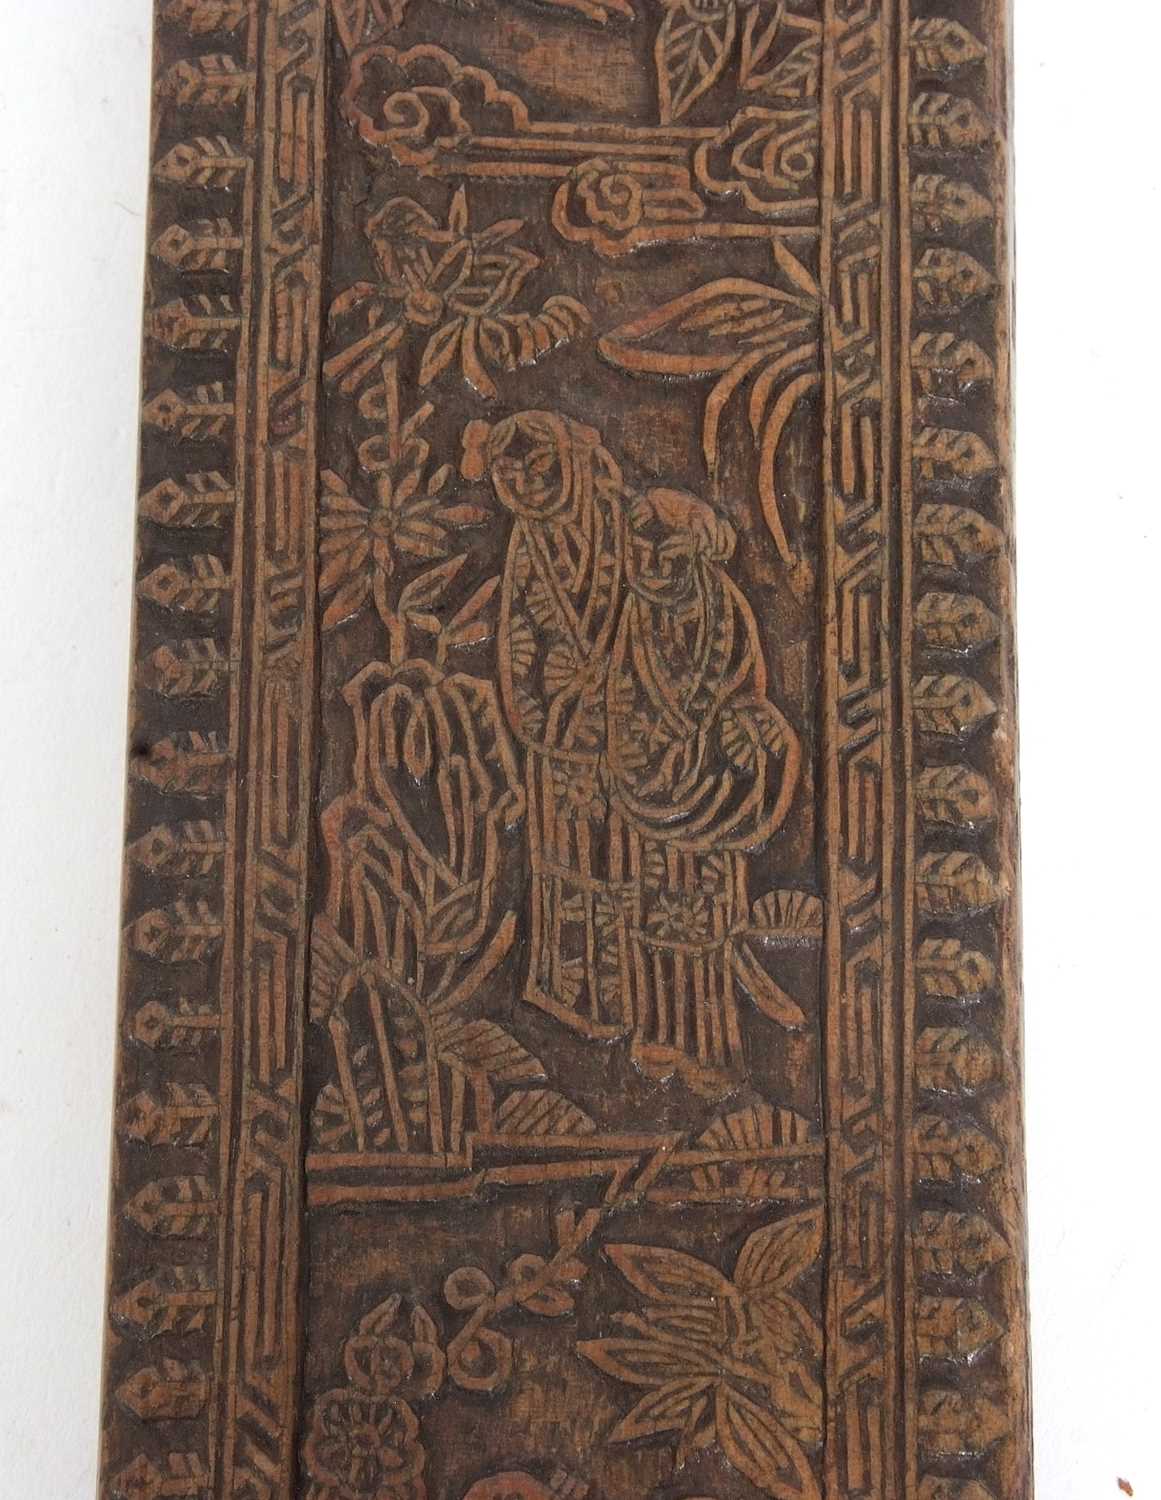 An antique Chinese wooden printing block decorated with figures, birds and foliage, 45 x 9cm - Image 5 of 7